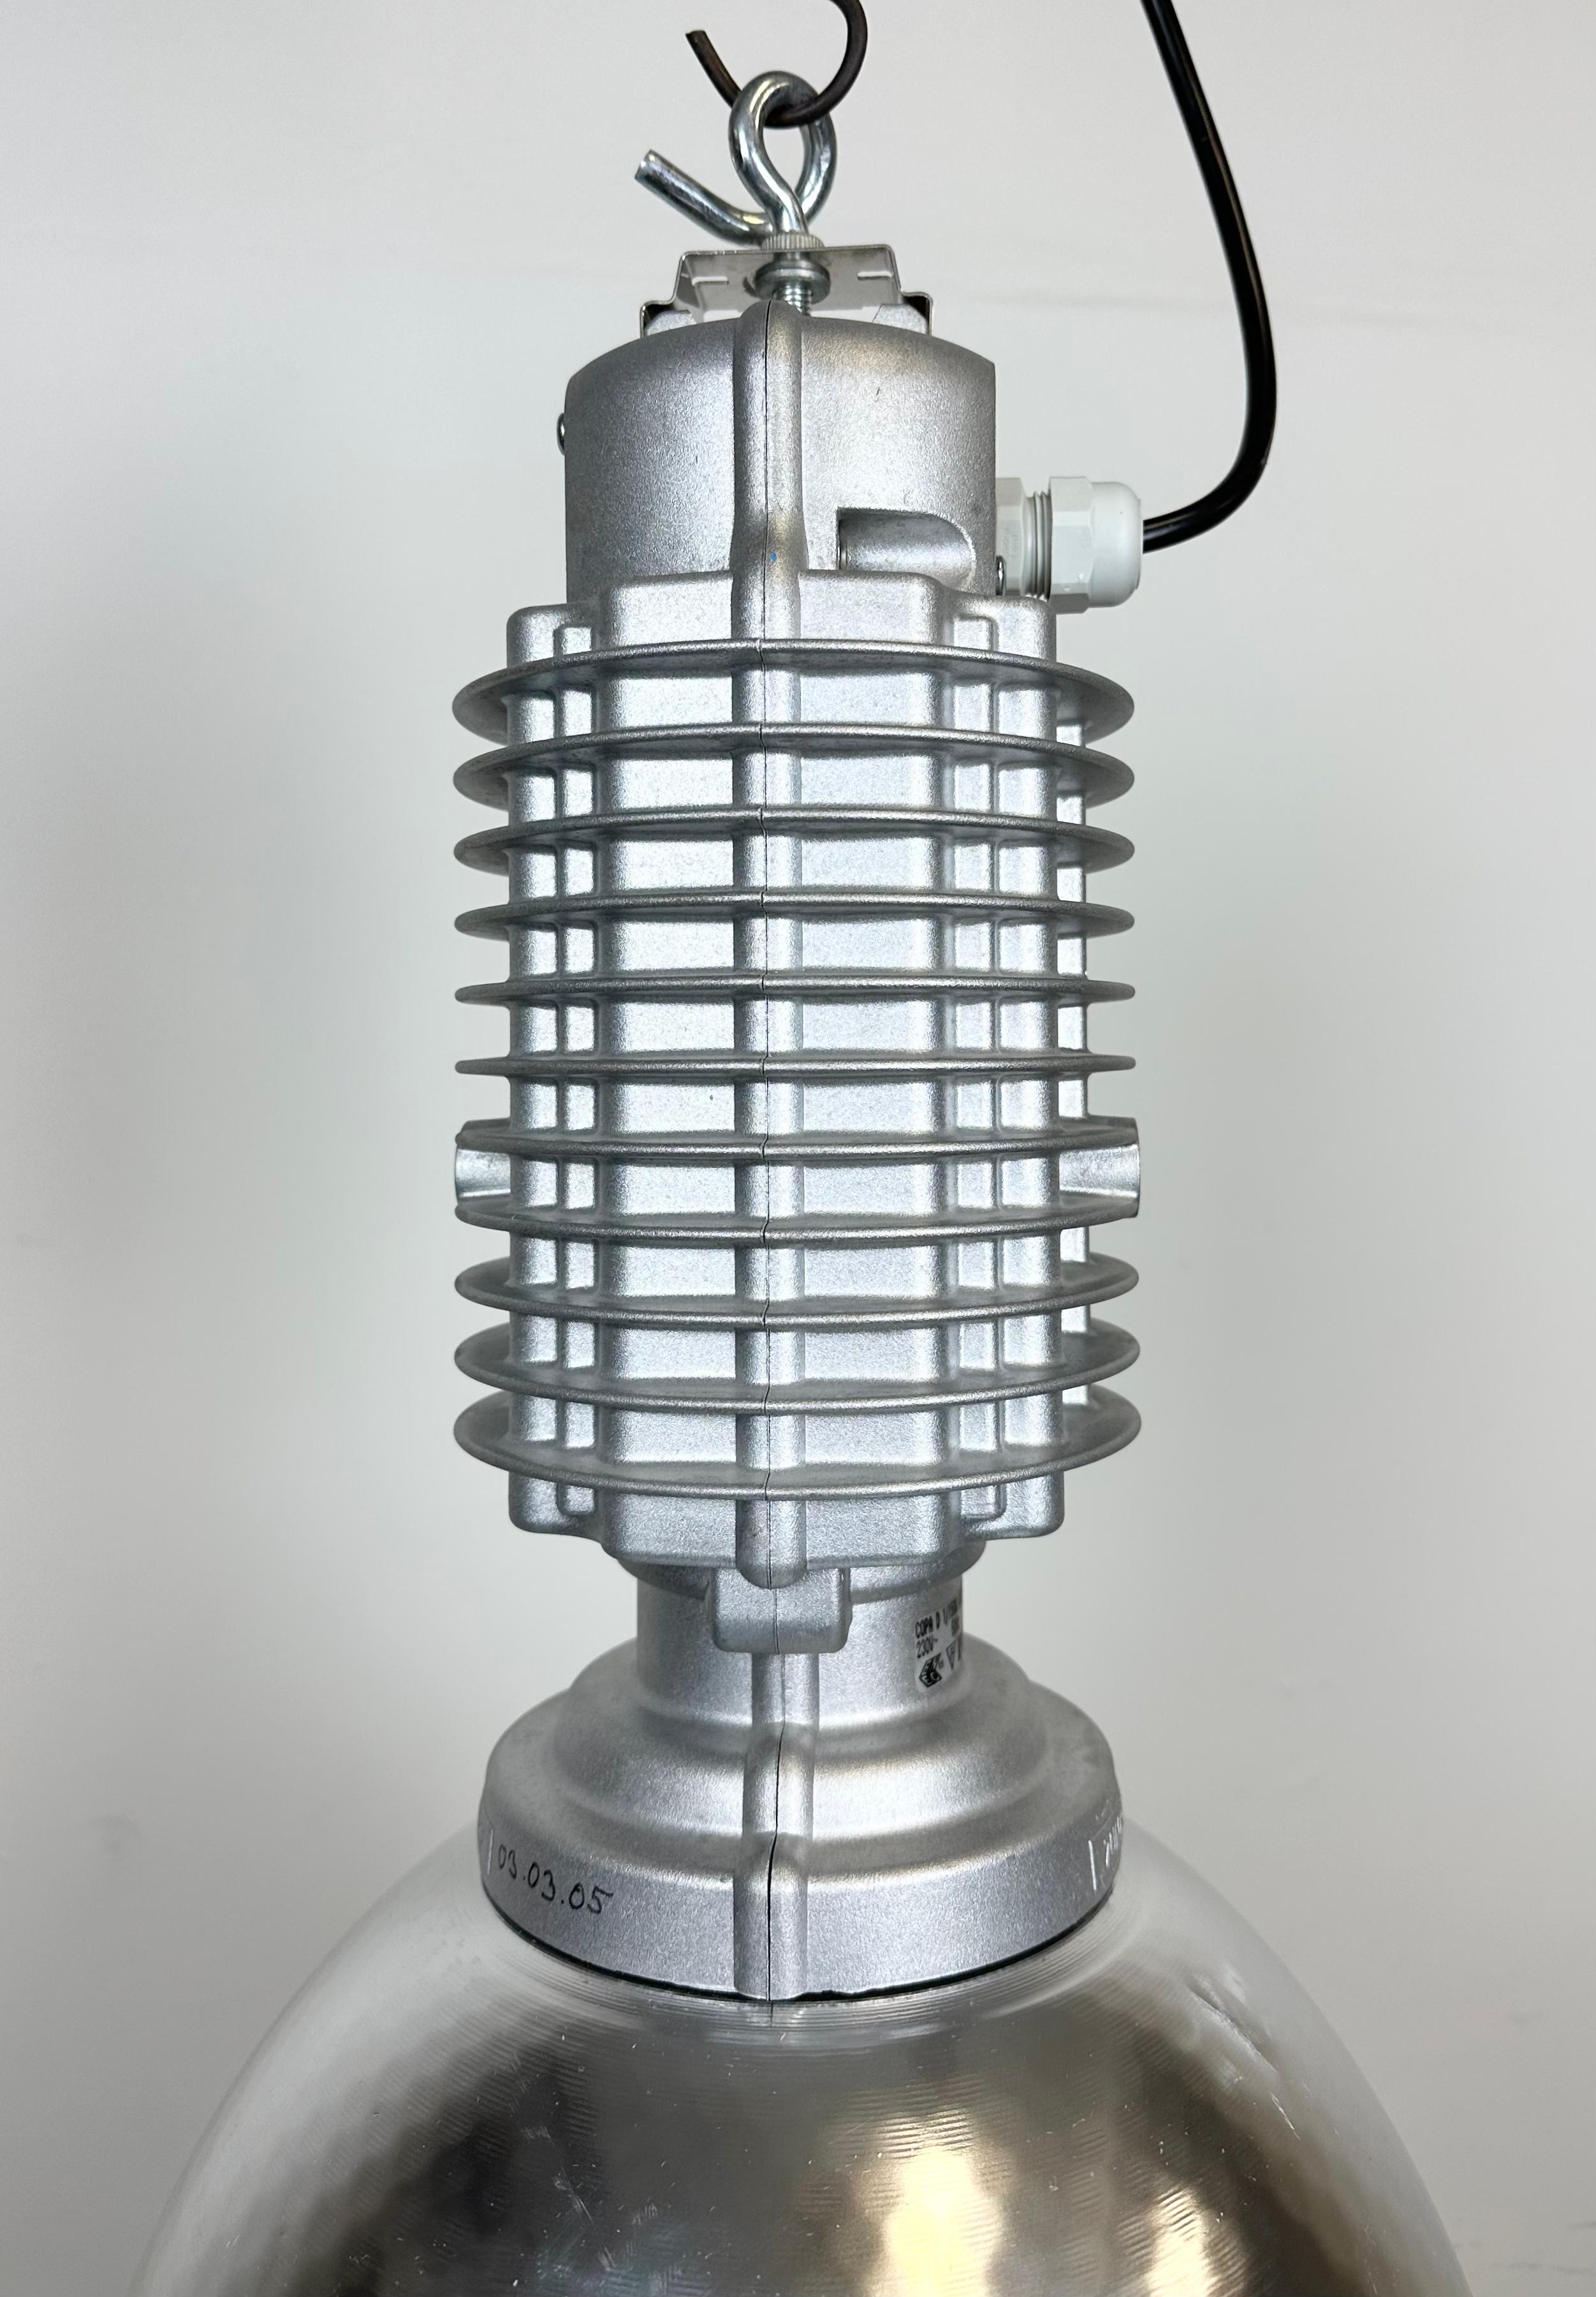 Cast Industrial Pendant Lamp with Glass Cover by Charles Keller for Zumtobel, 1990s For Sale